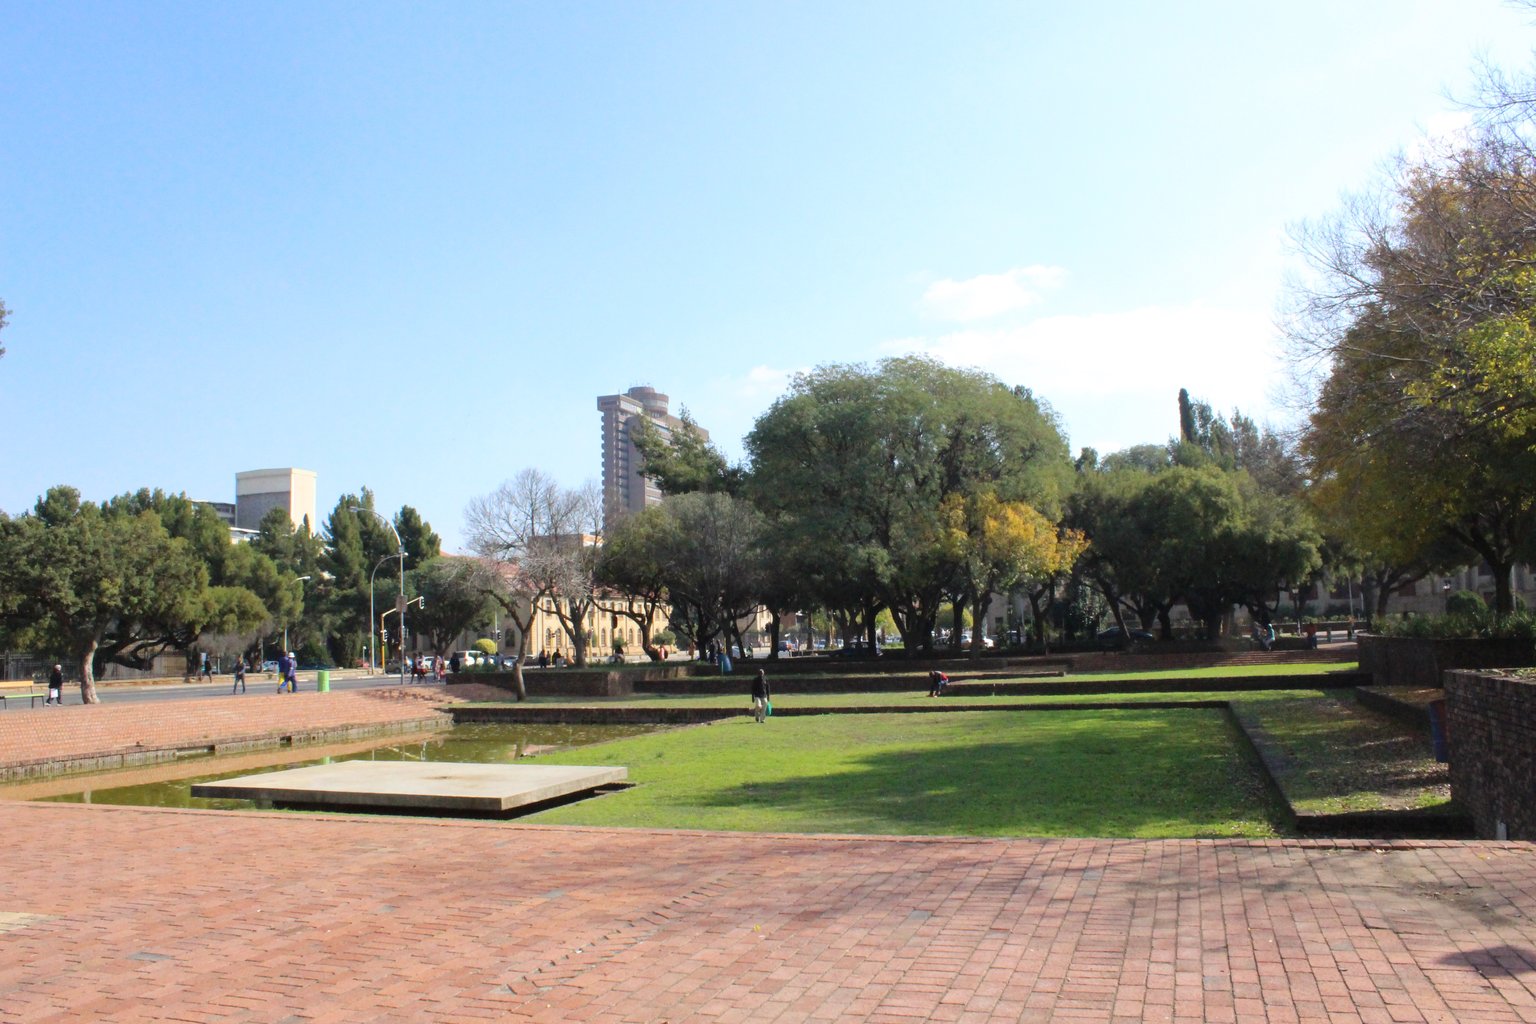 Discover Bloemfontein: City Hall, Hertzogt Square and Surrounding Parks